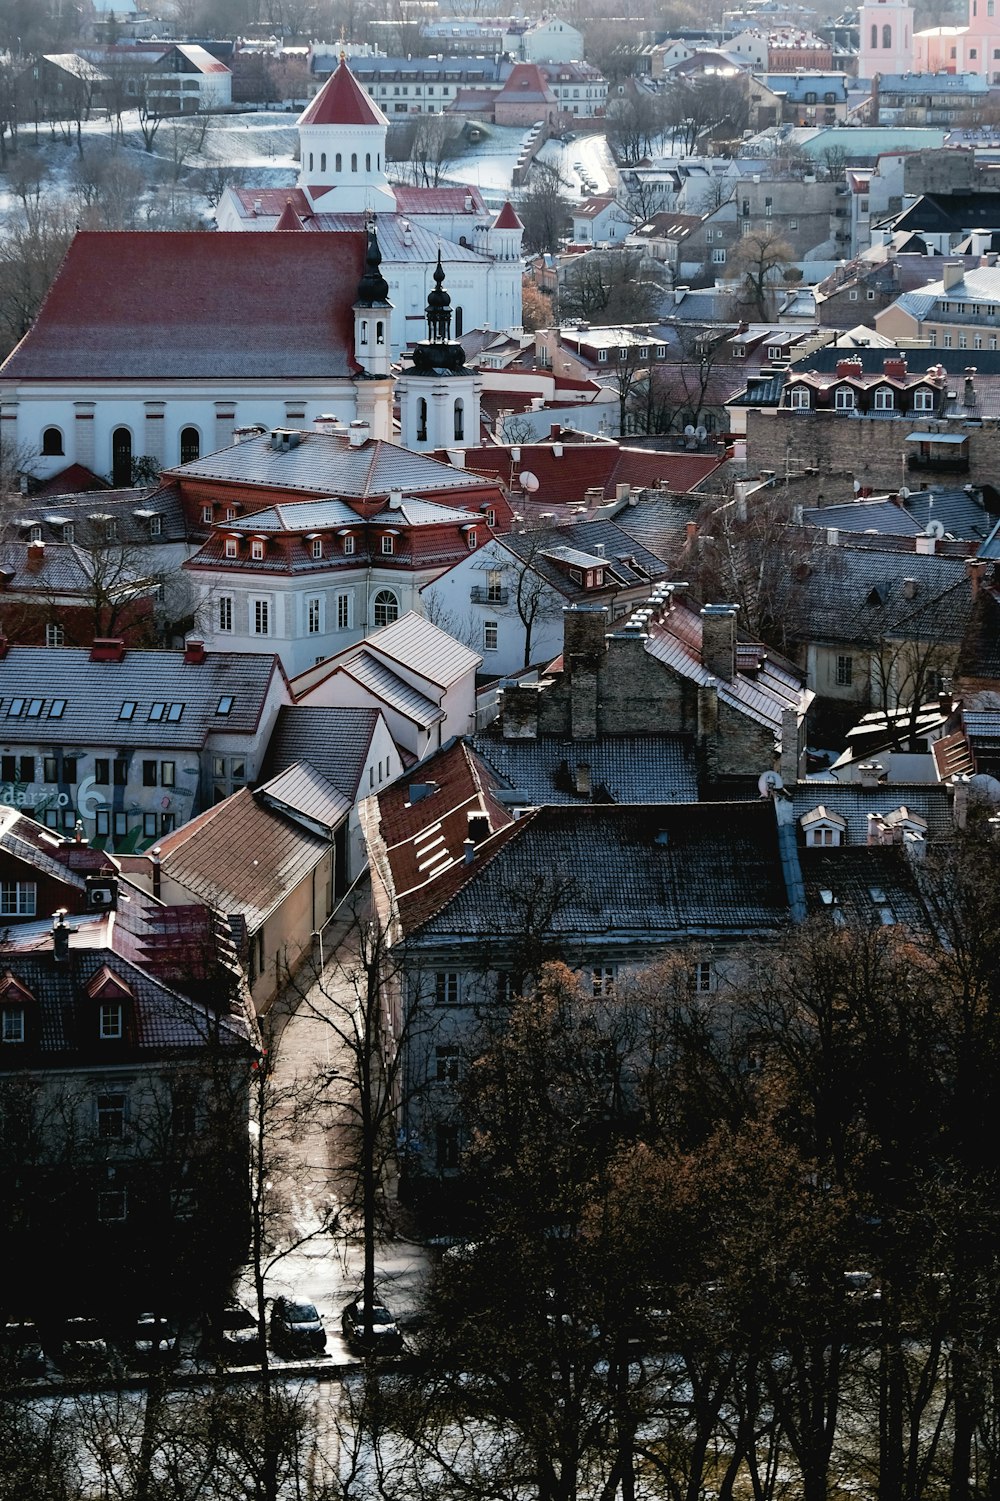 a view of a city from a high point of view